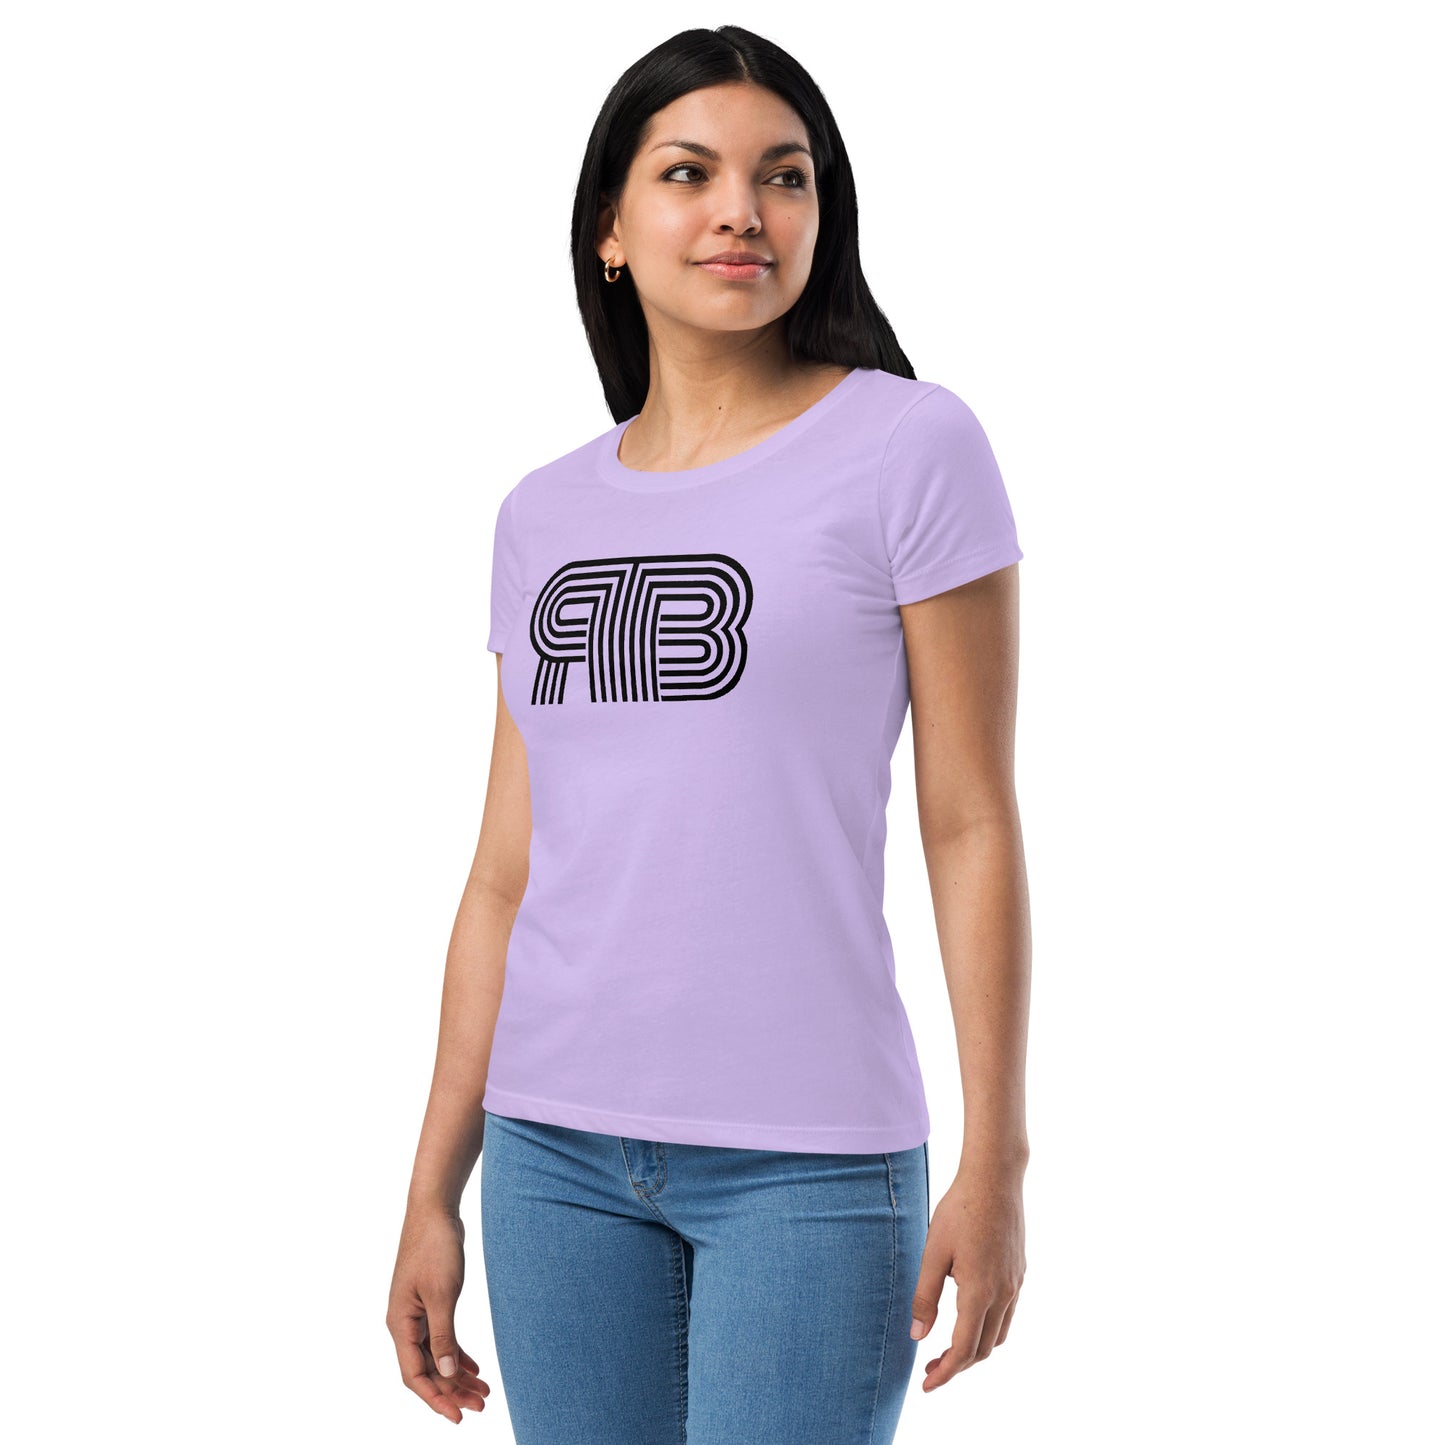 RB Women’s fitted t-shirt